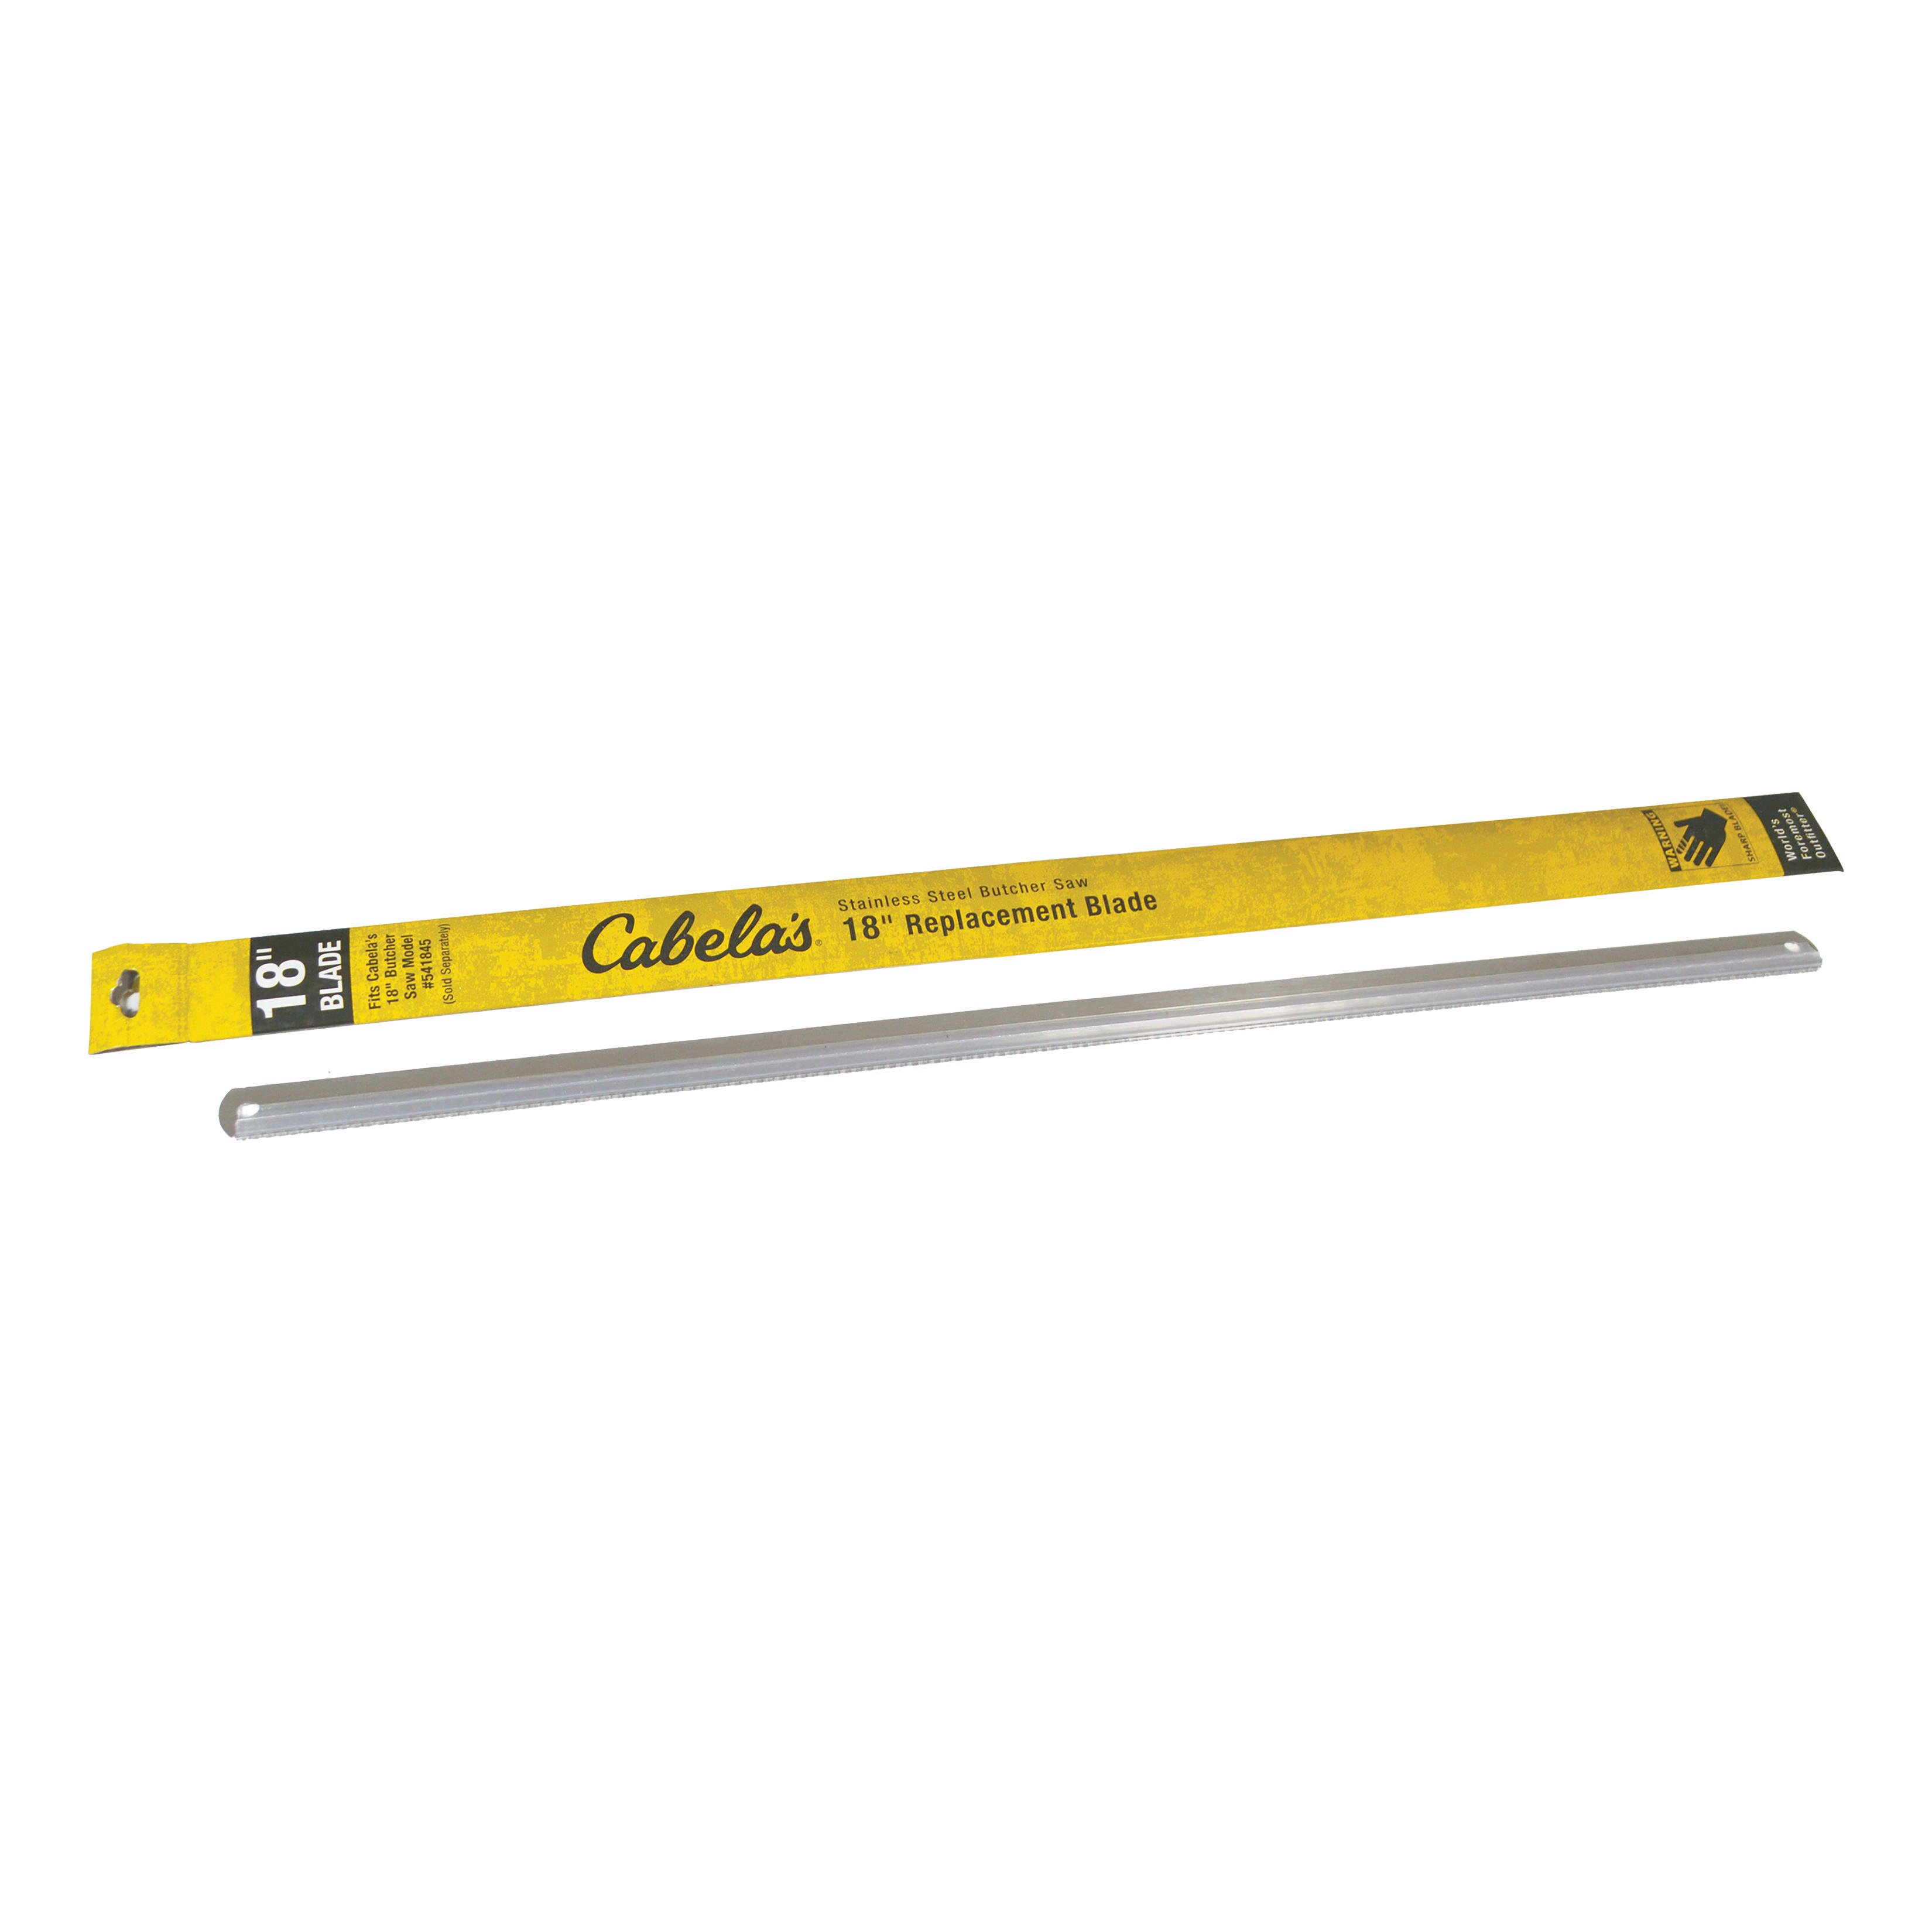 Cabela's 18" Butcher Saw Replacement Blade